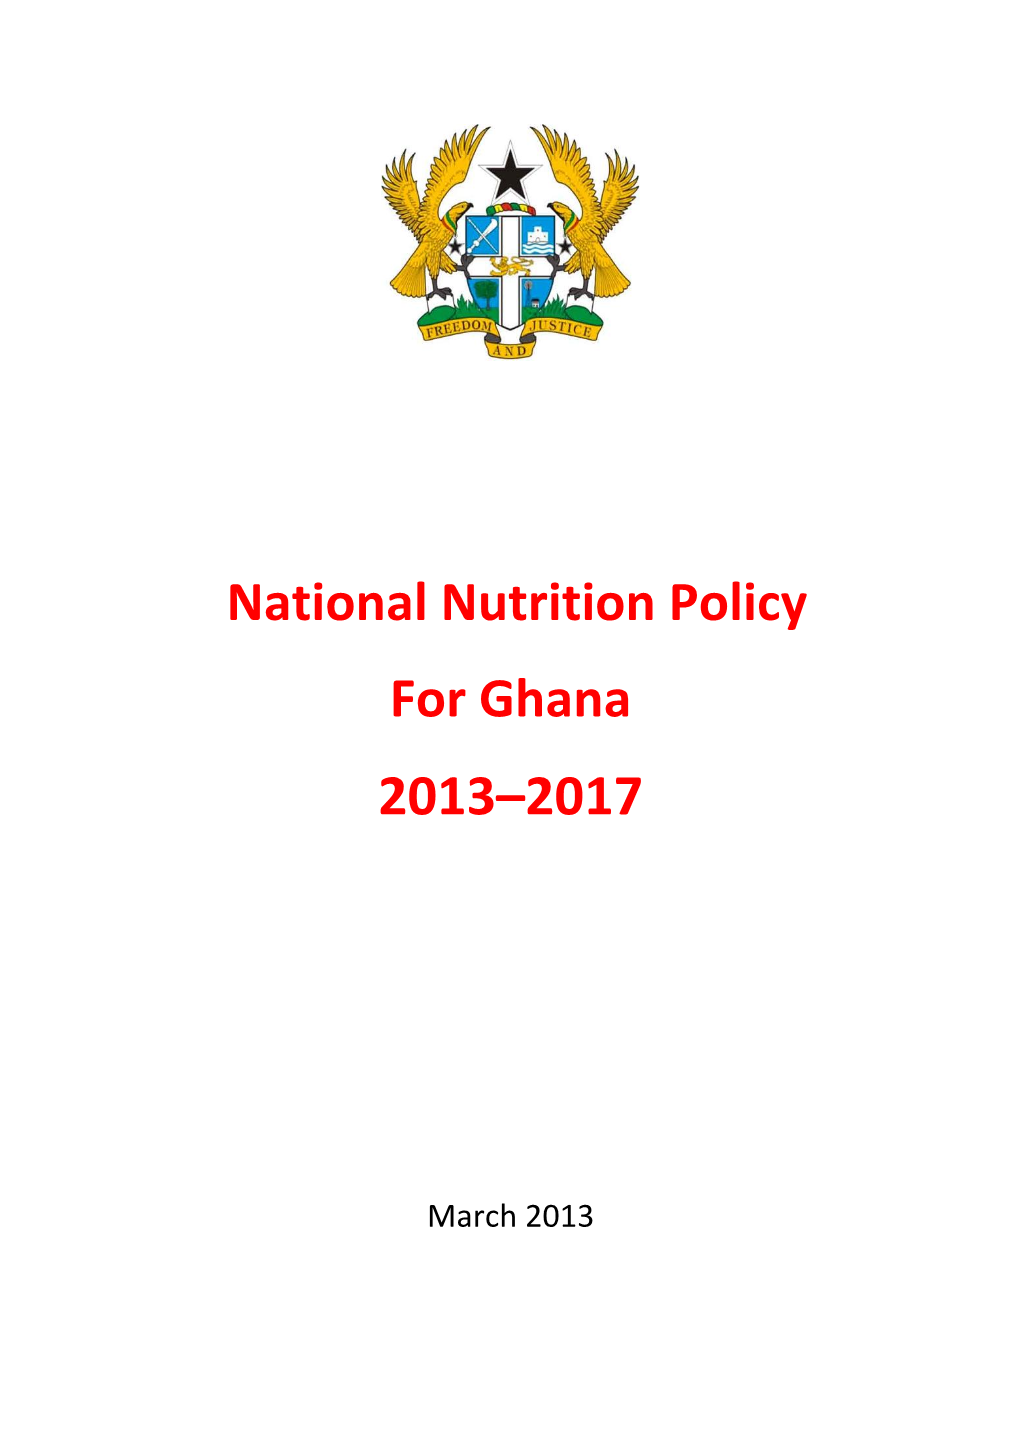 National Nutrition Policy for Ghana 2013–2017